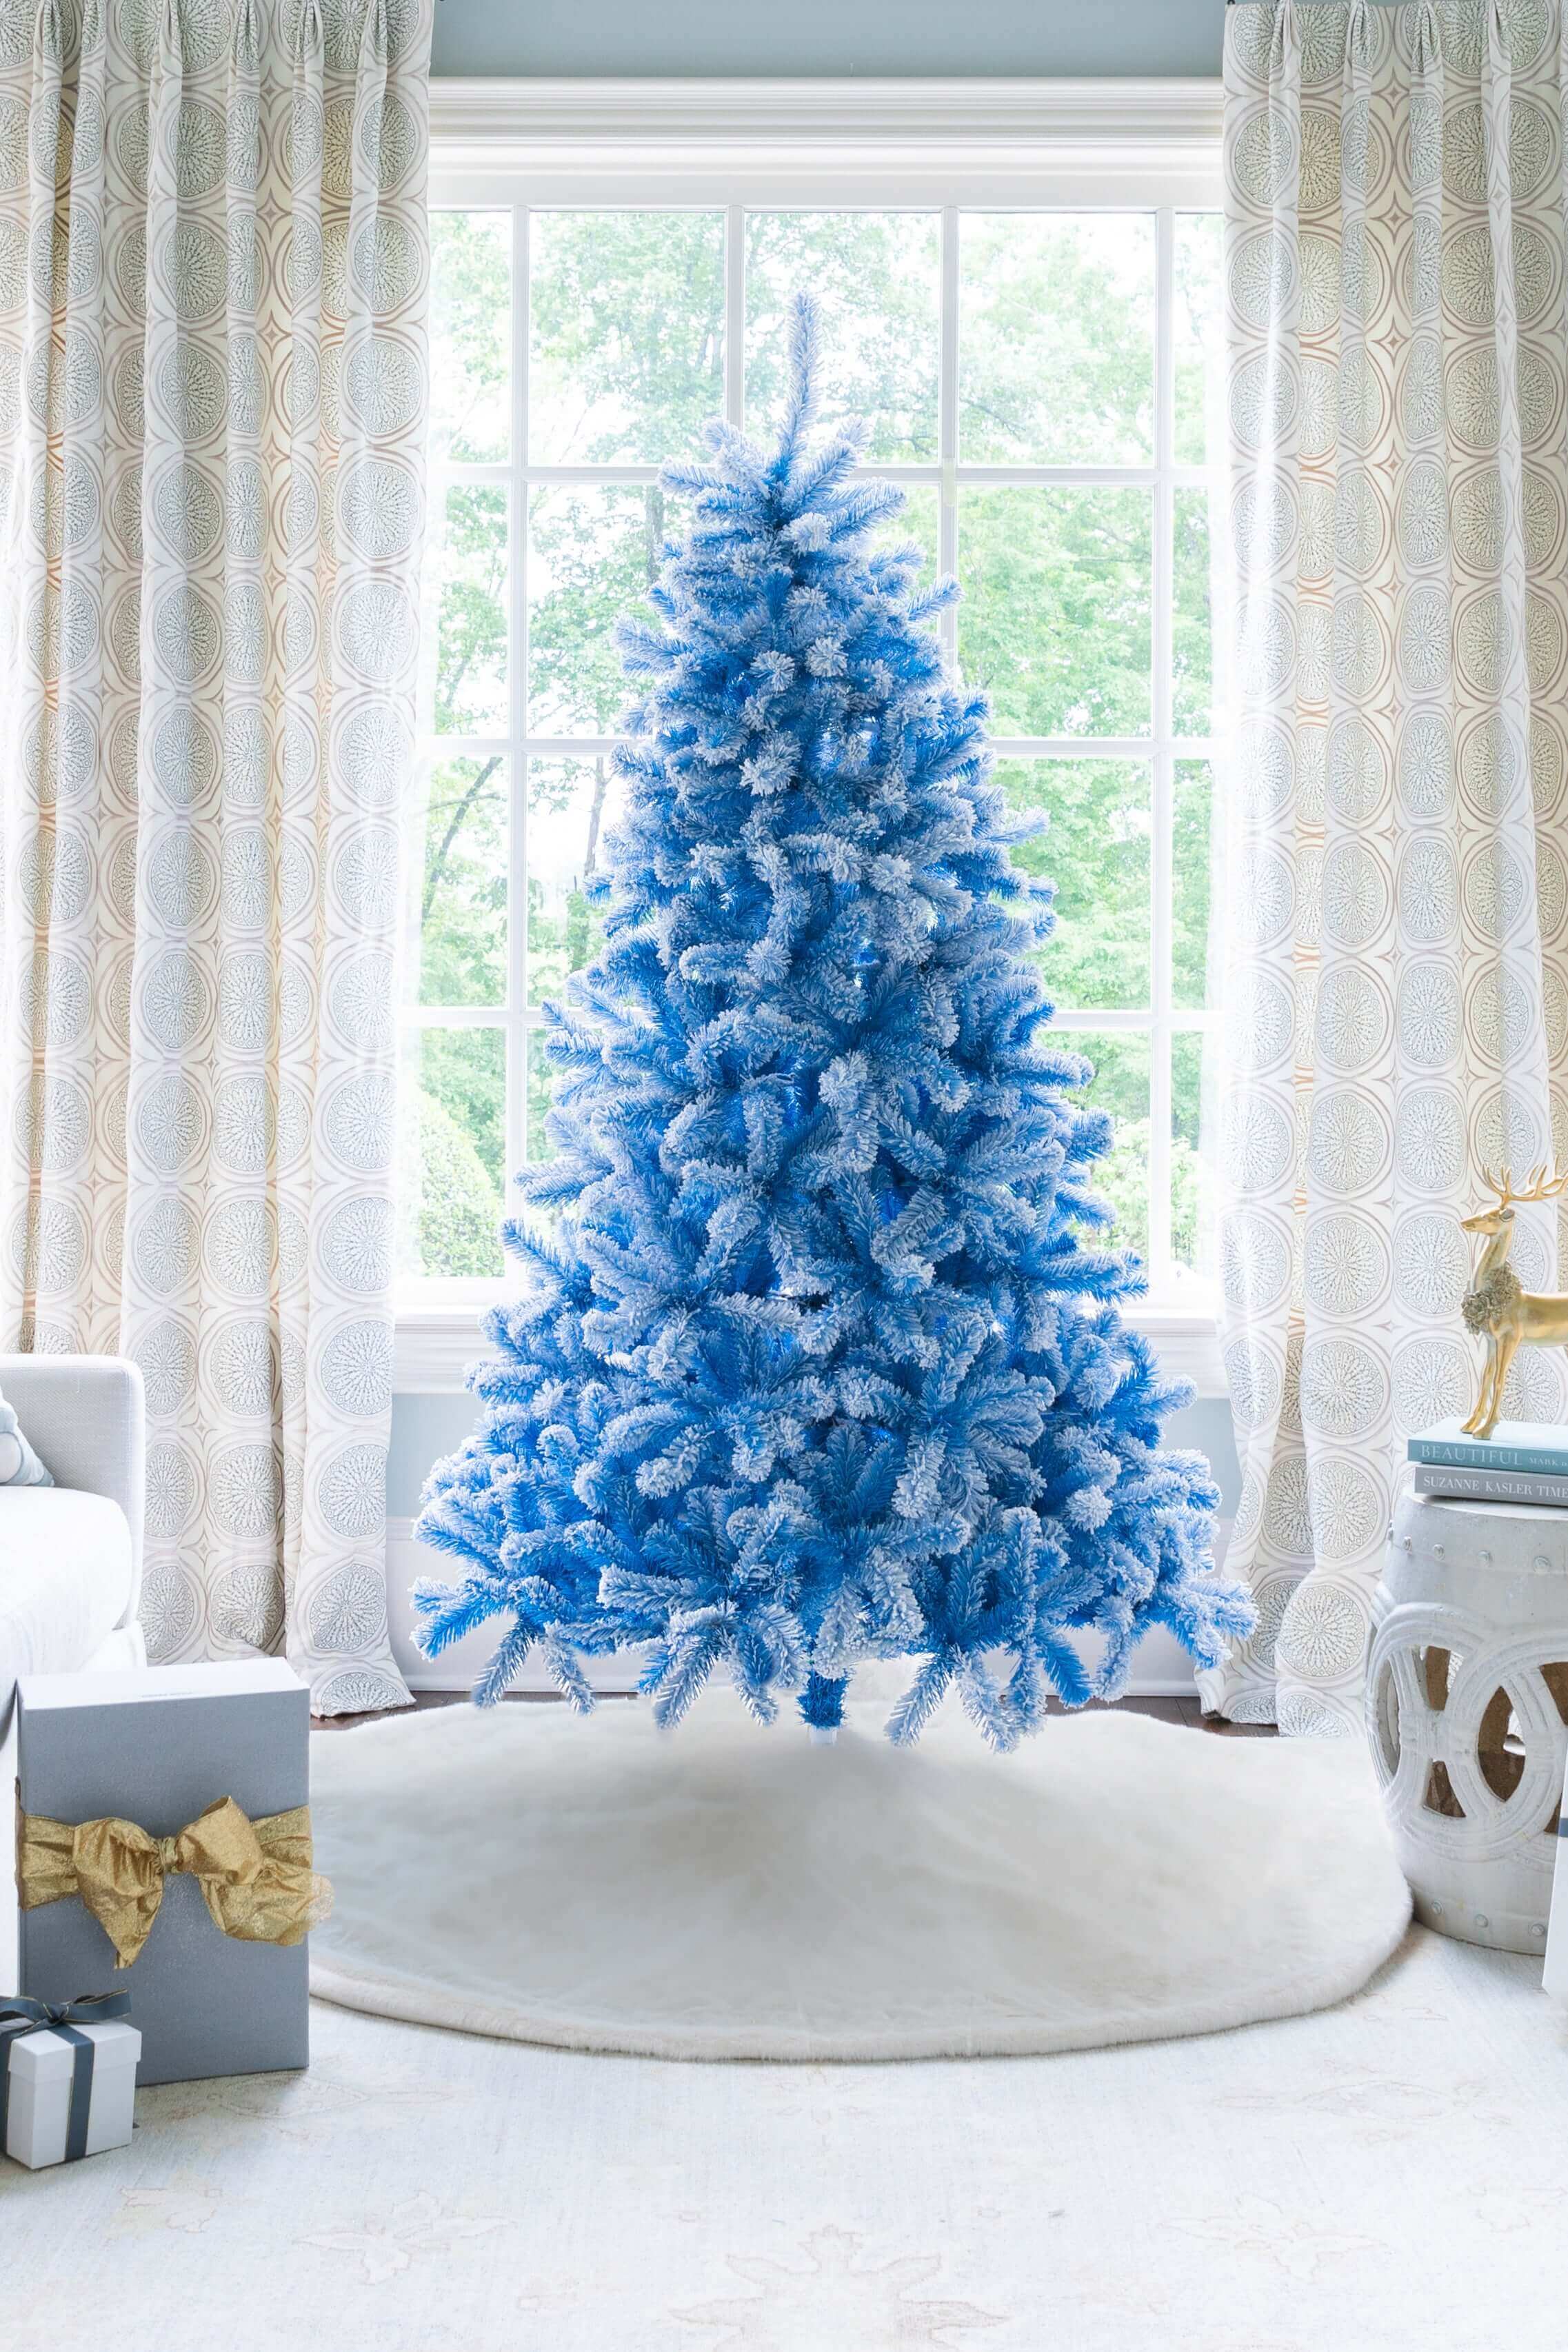 King of Christmas 6.5' Duchess Blue Flock Artificial Christmas Tree with 500 Warm White LED Lights